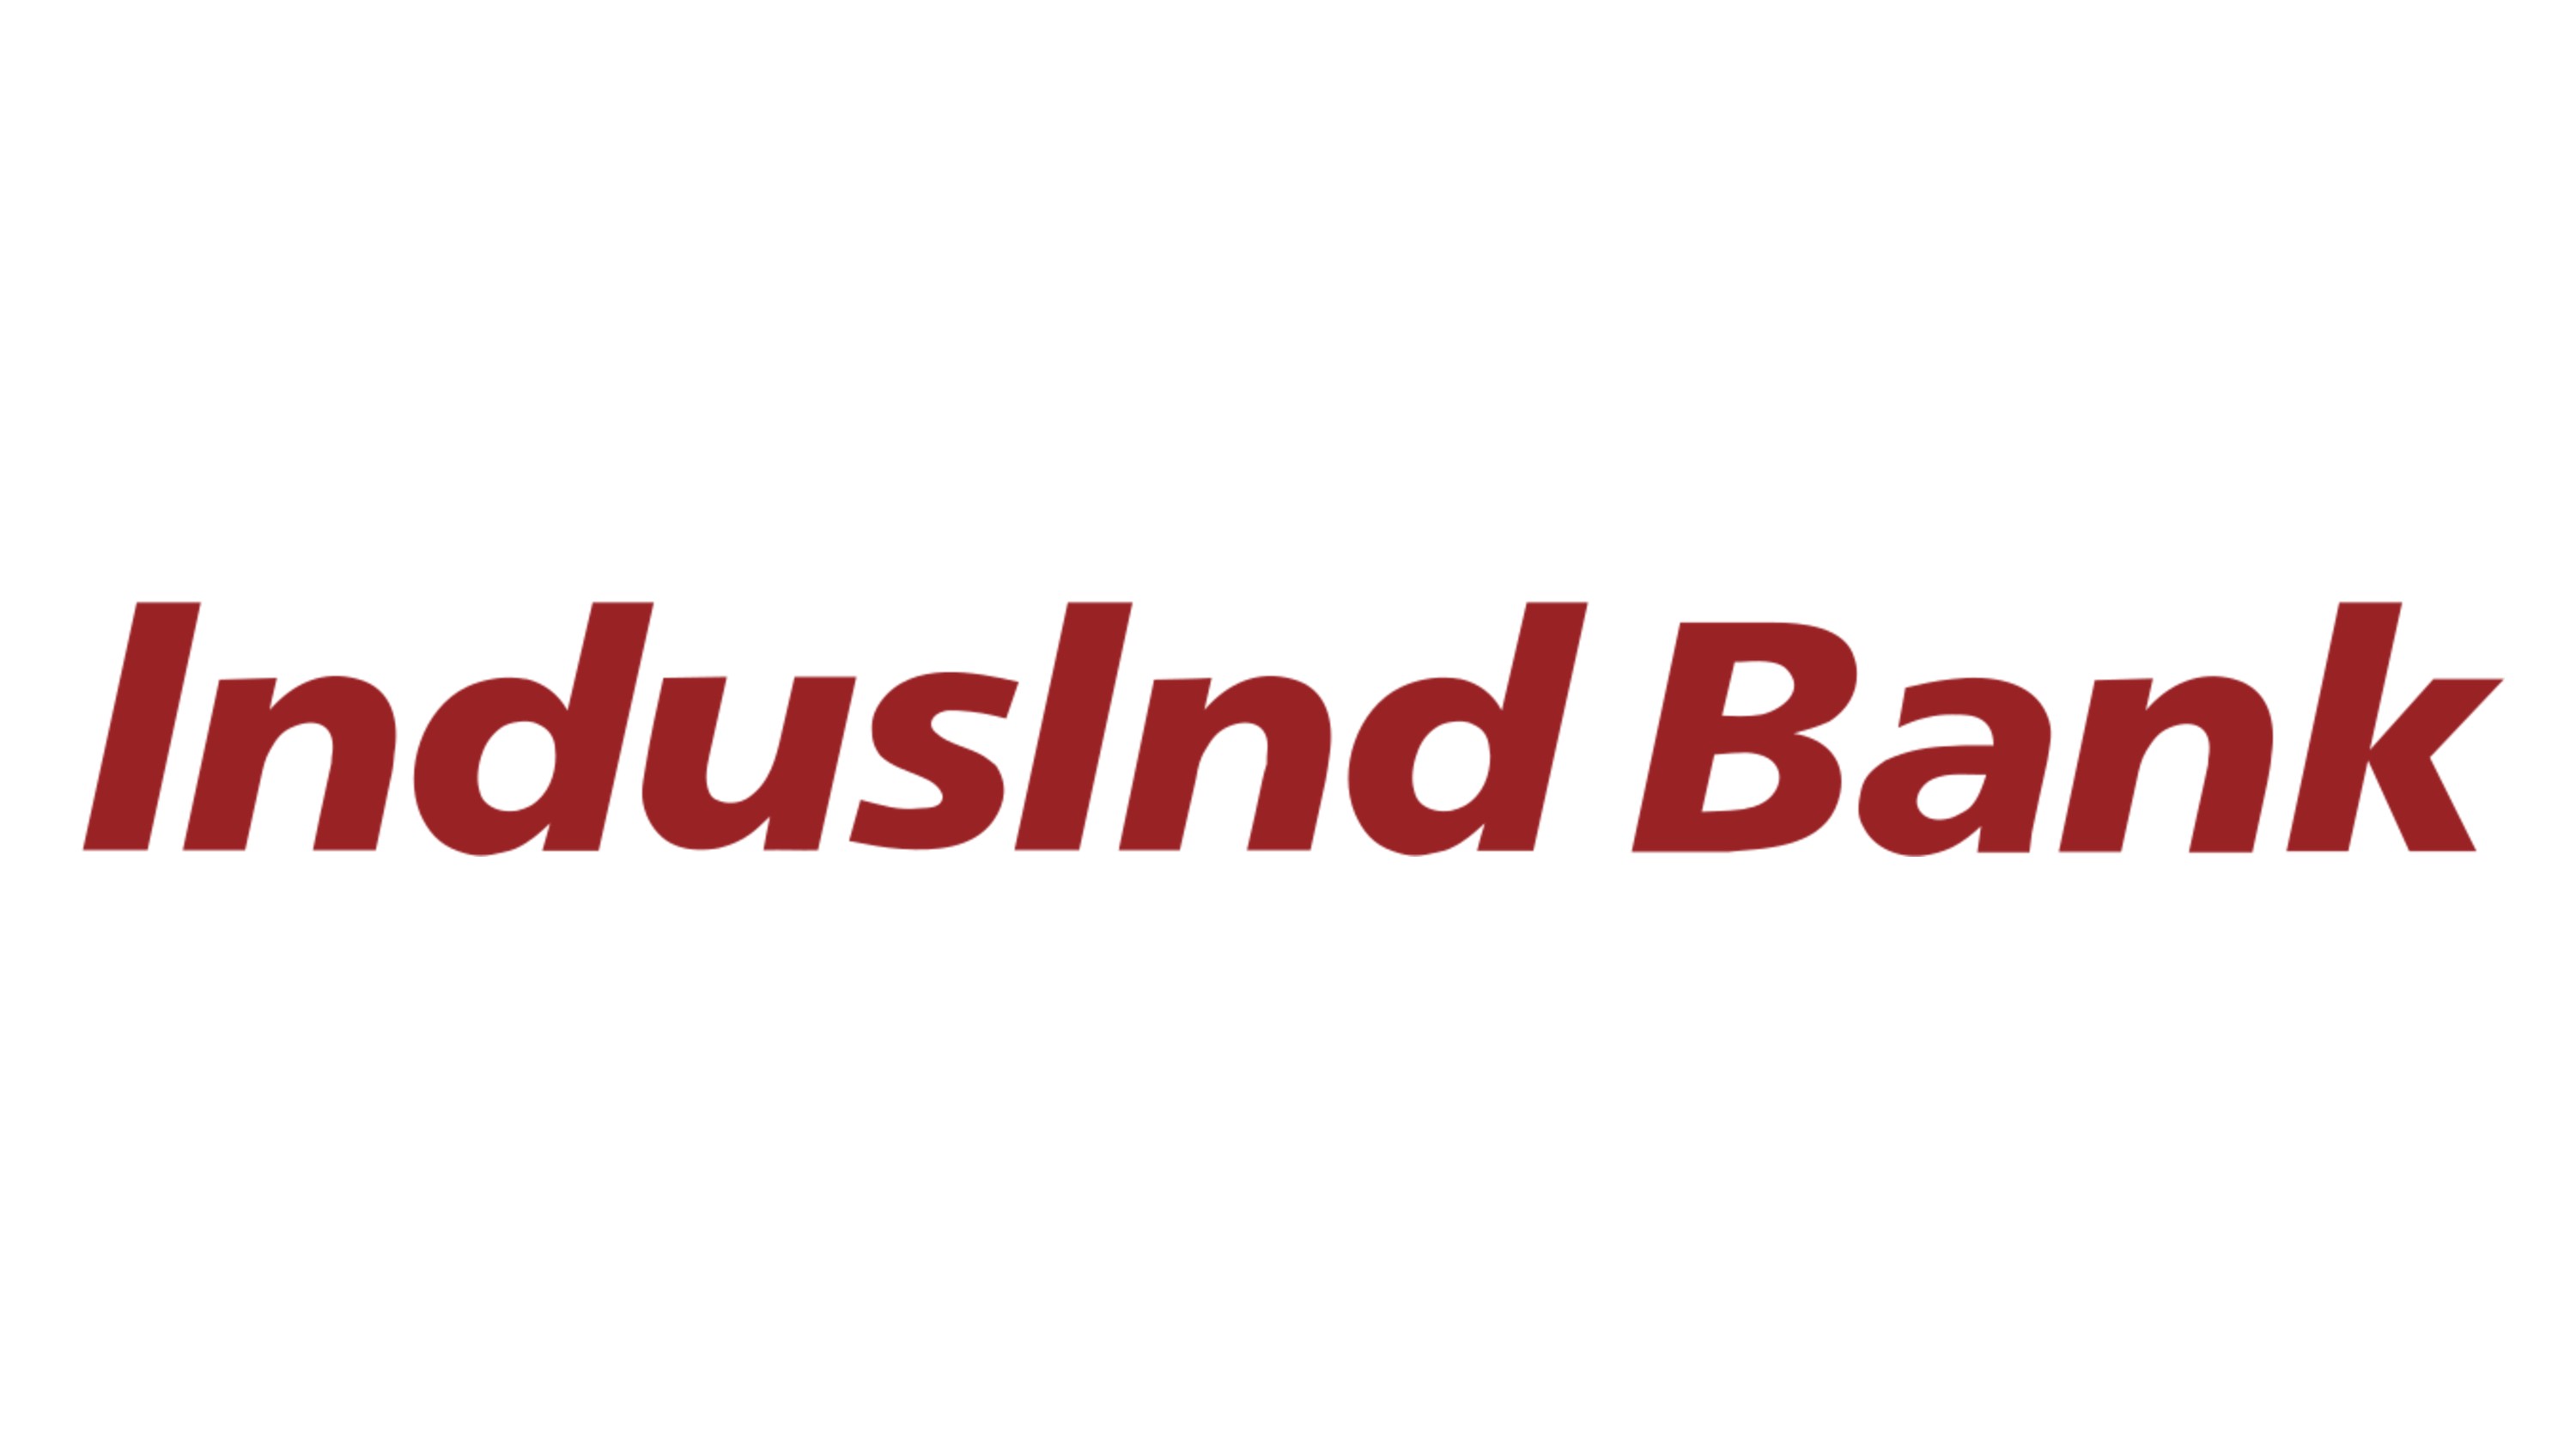 INDUSIND BANK LIMITED ANNOUNCES FINANCIAL RESULTS FOR THE QUARTER AND YEAR ENDED MARCH 31, 2022 decoding=